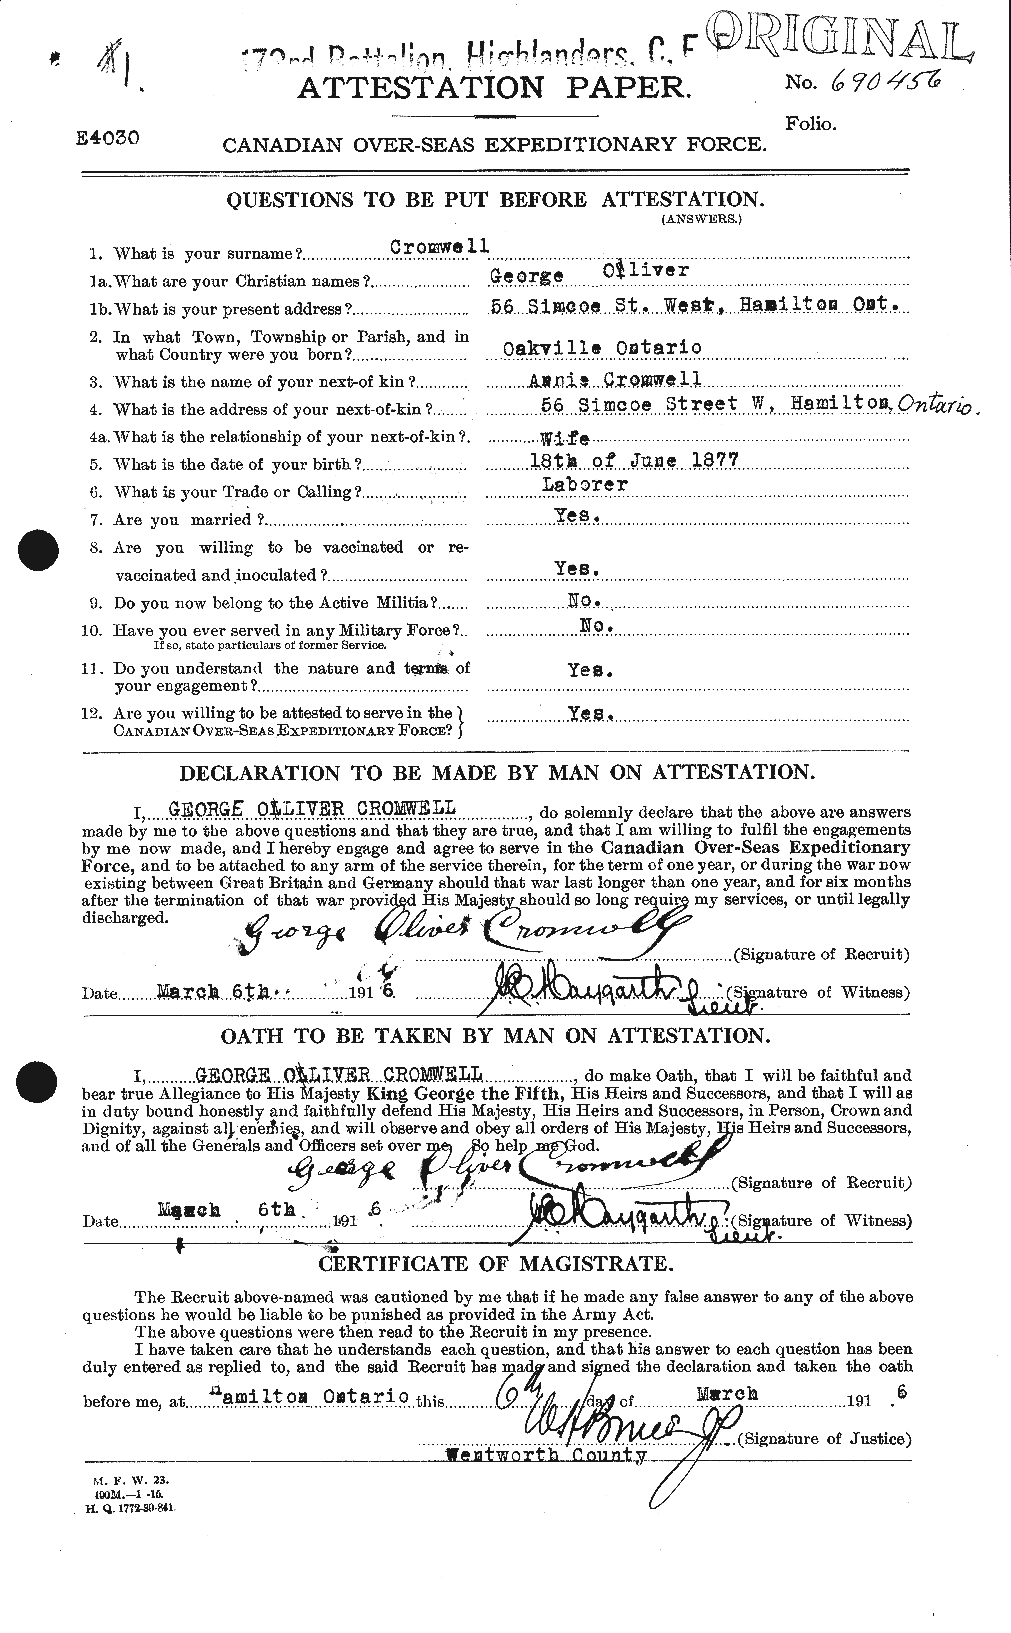 Personnel Records of the First World War - CEF 064929a